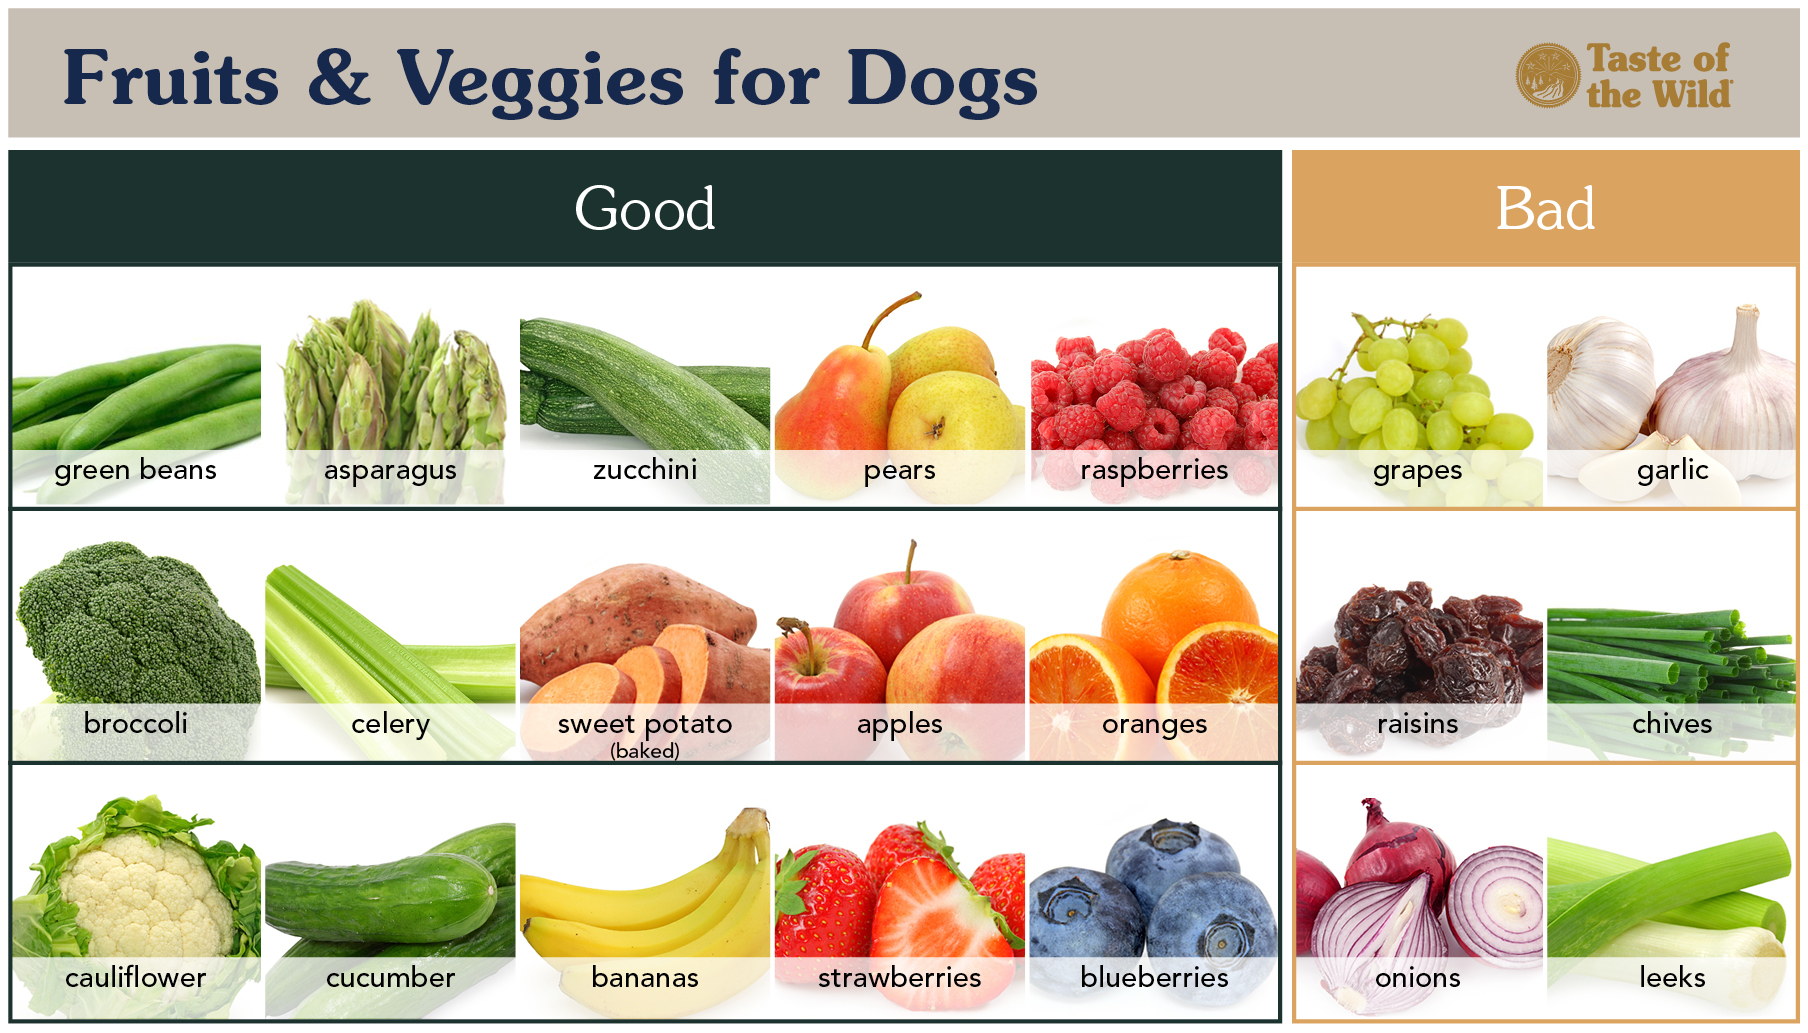 Good and Bad Fruits and Veggies for Pets Chart | Taste of the Wild